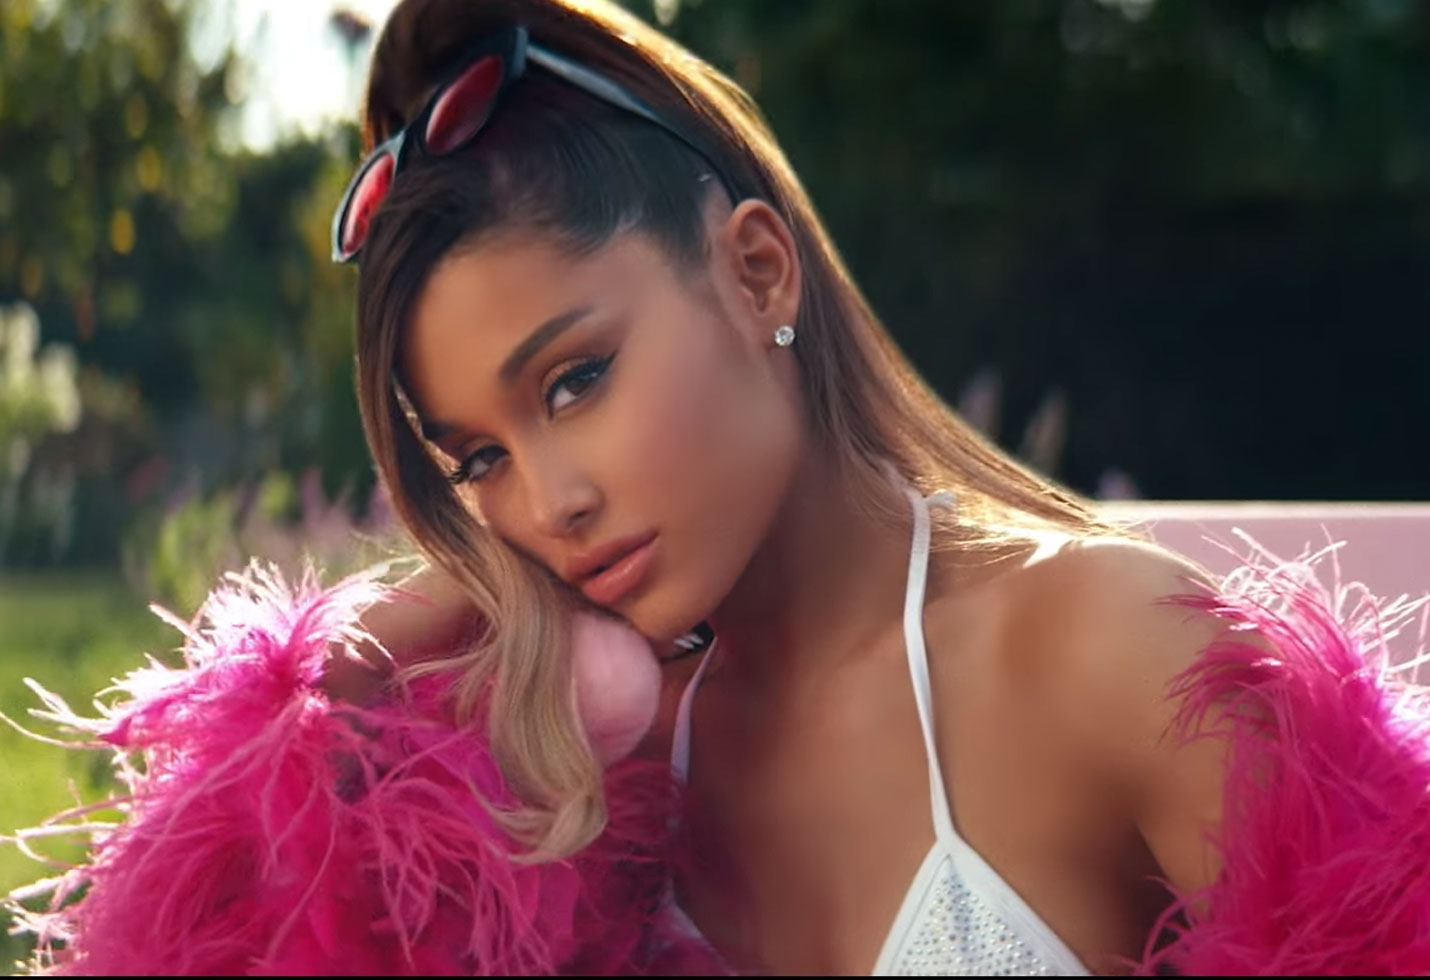 Ariana Grandes Thank U Next Video Message For Pete